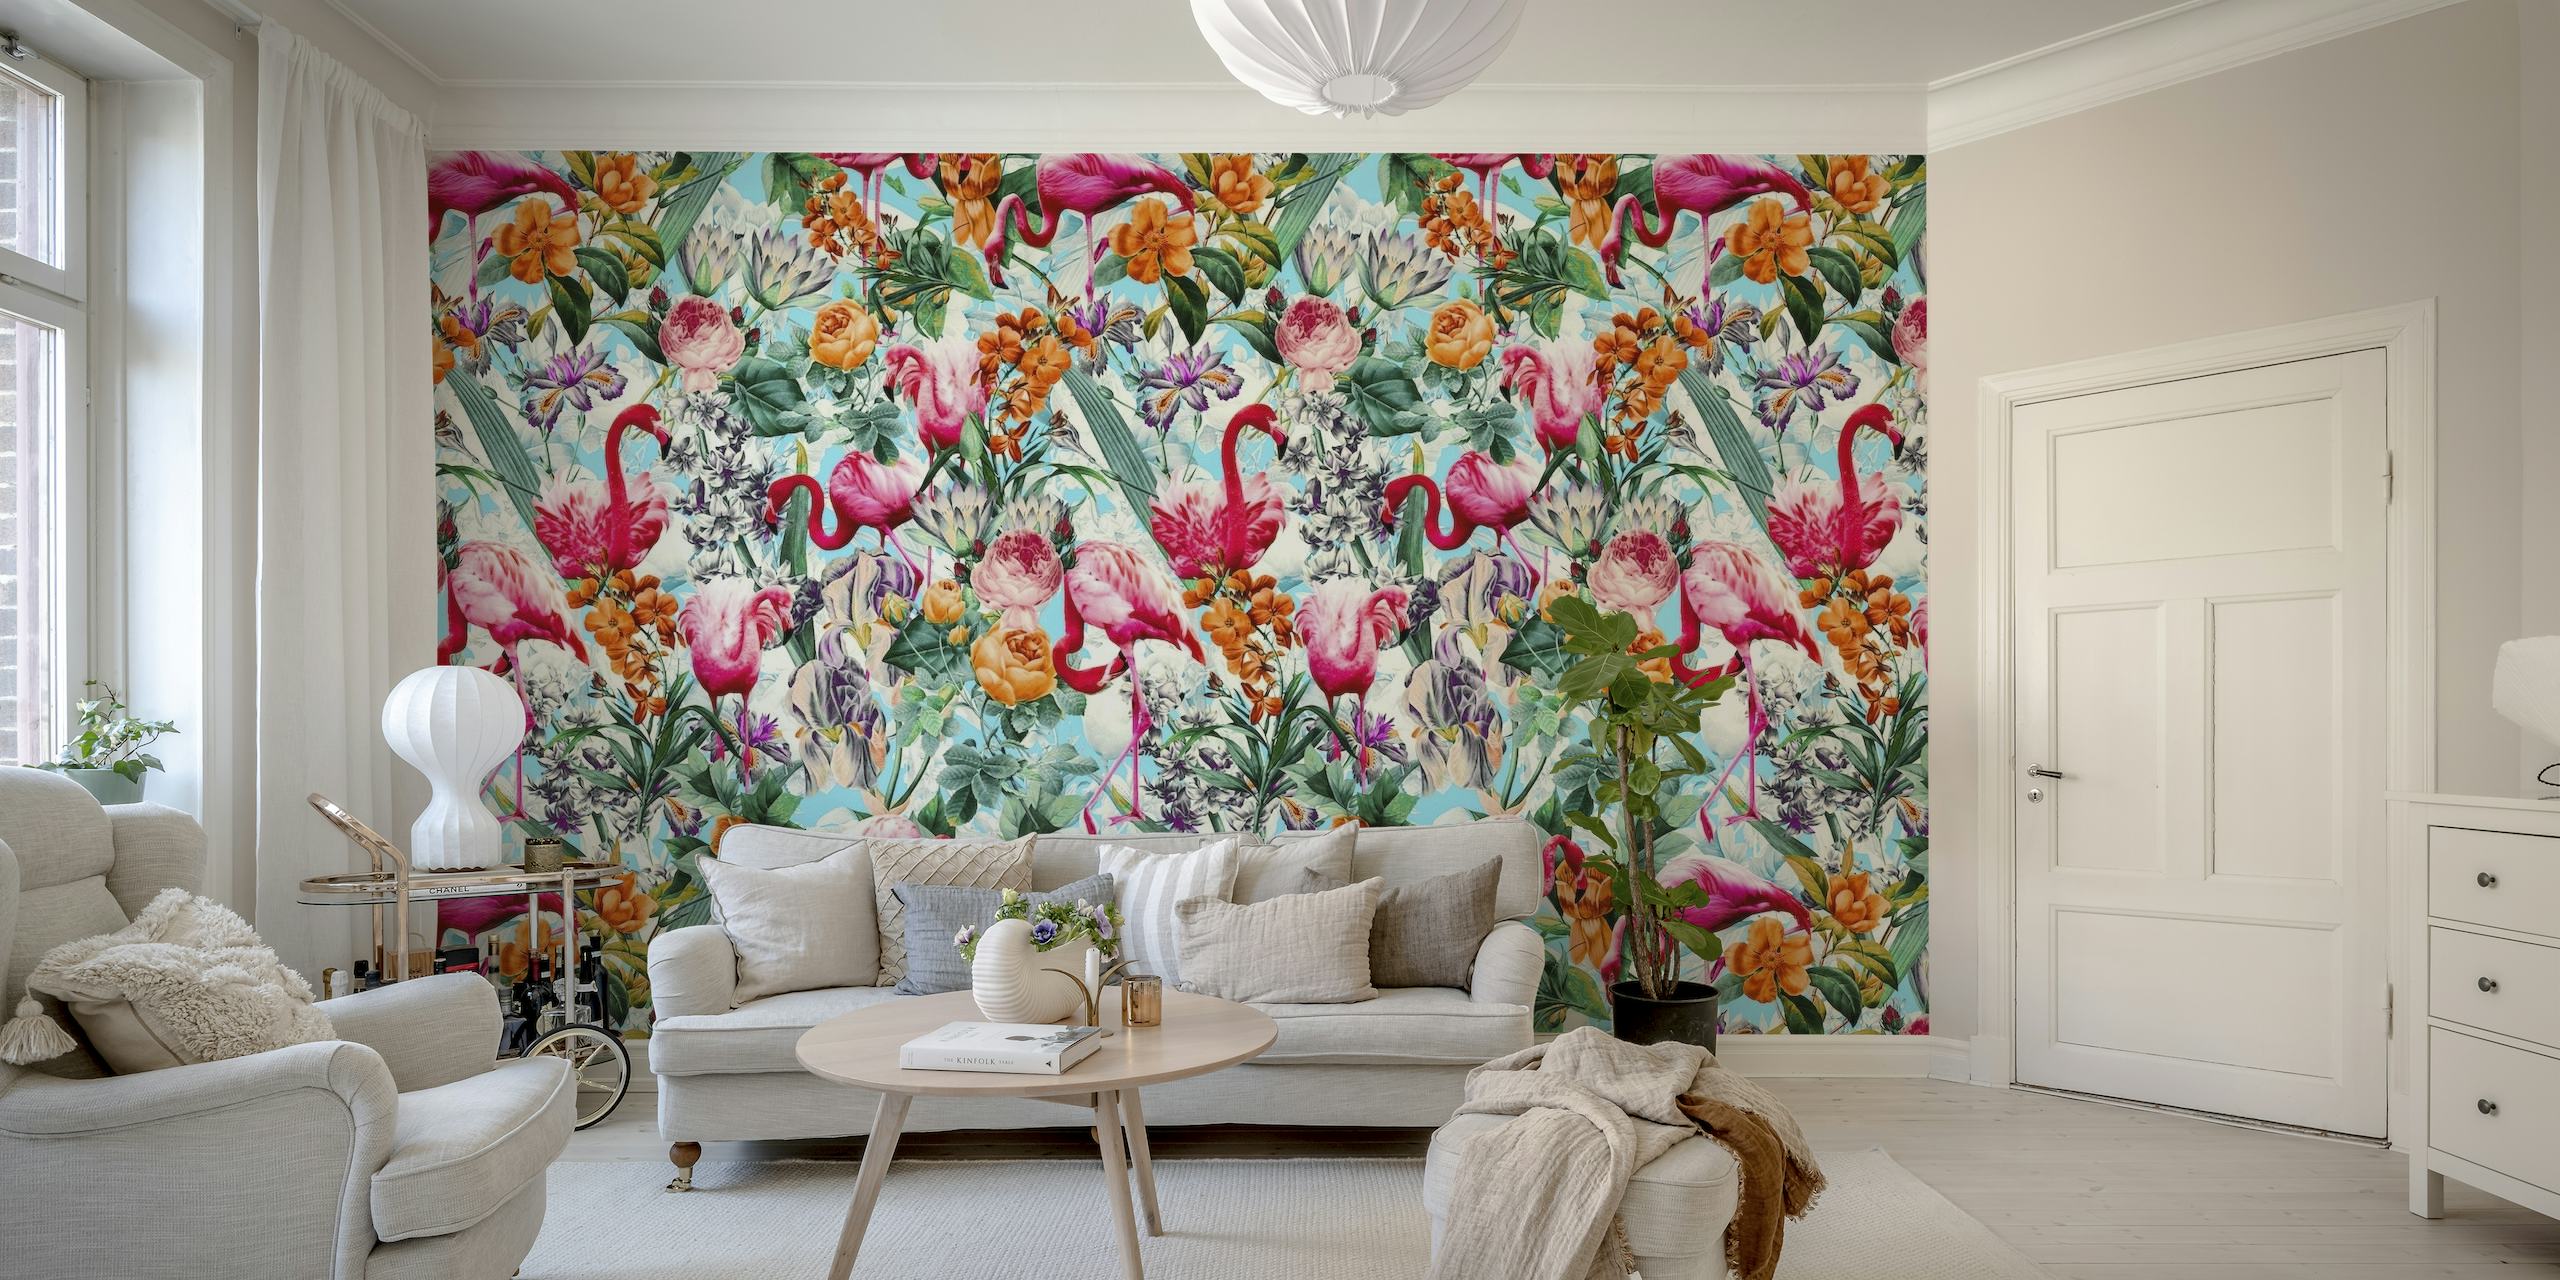 Elegant flamingos among vibrant flowers on a turquoise background in the 'Floral and Flamingo VII' wall mural